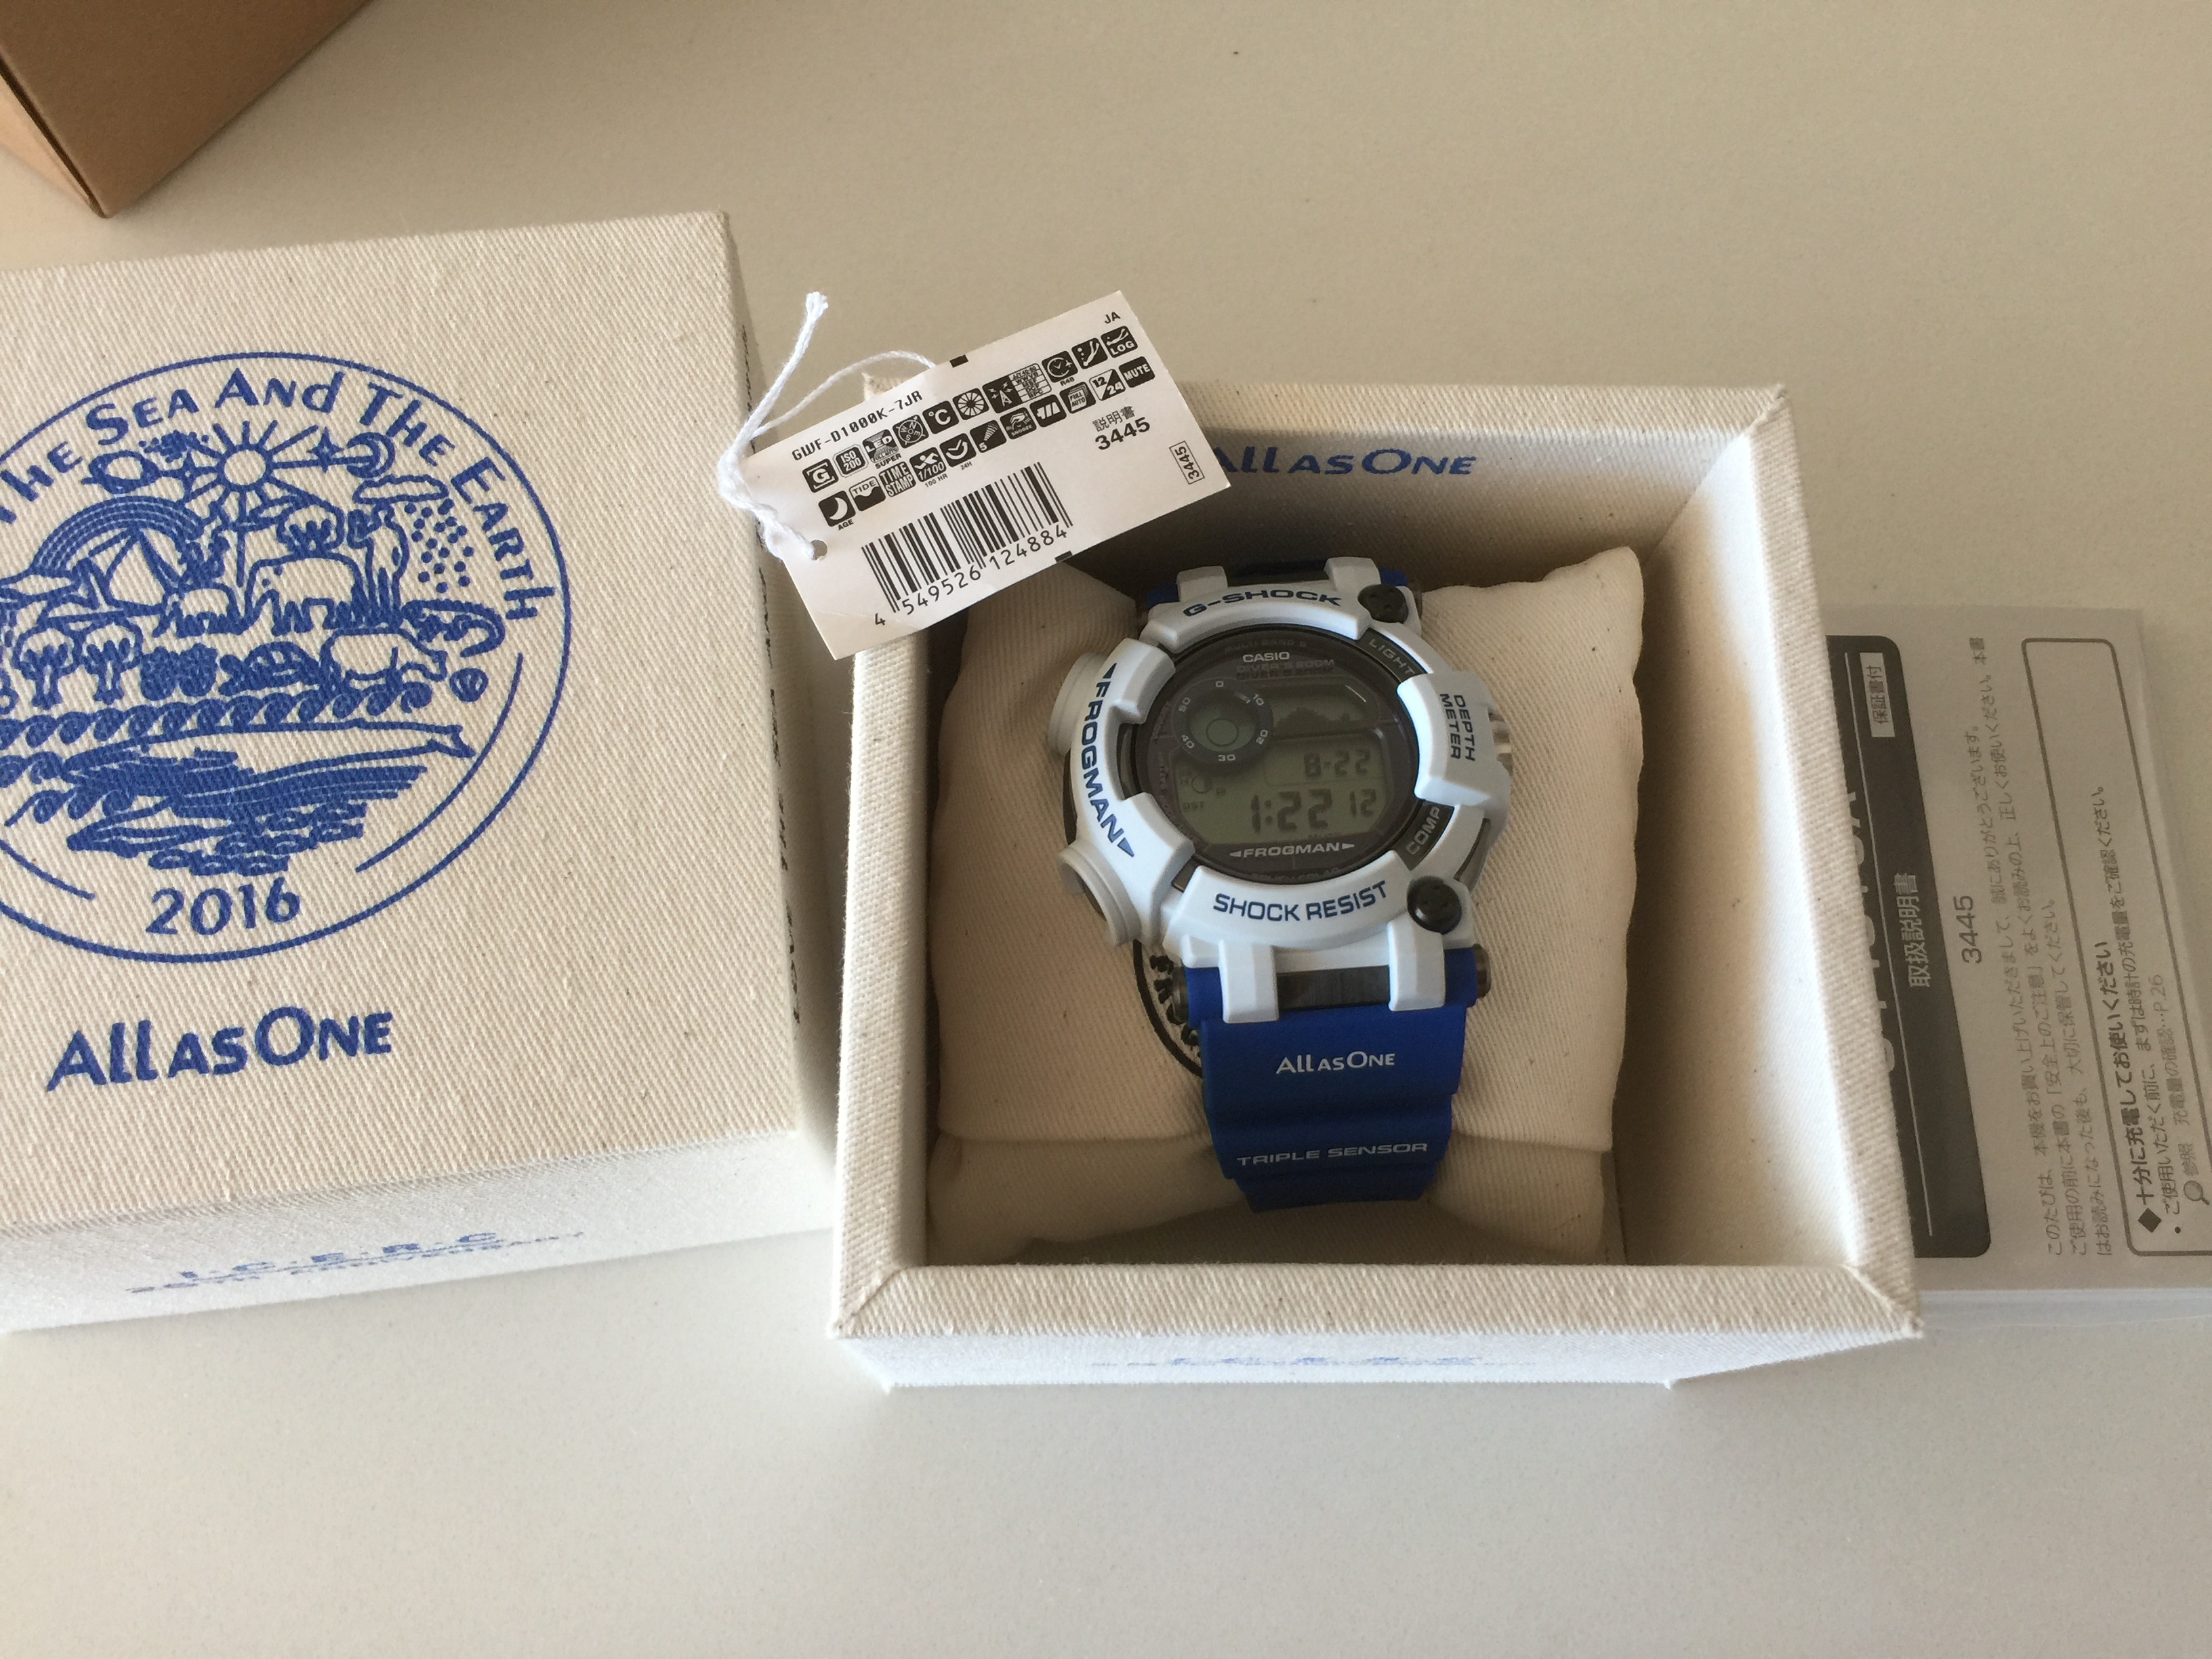 FS: Casio GWF-D1000K-7JR Frogman 'Love The Sea And The 2016' | WatchCharts